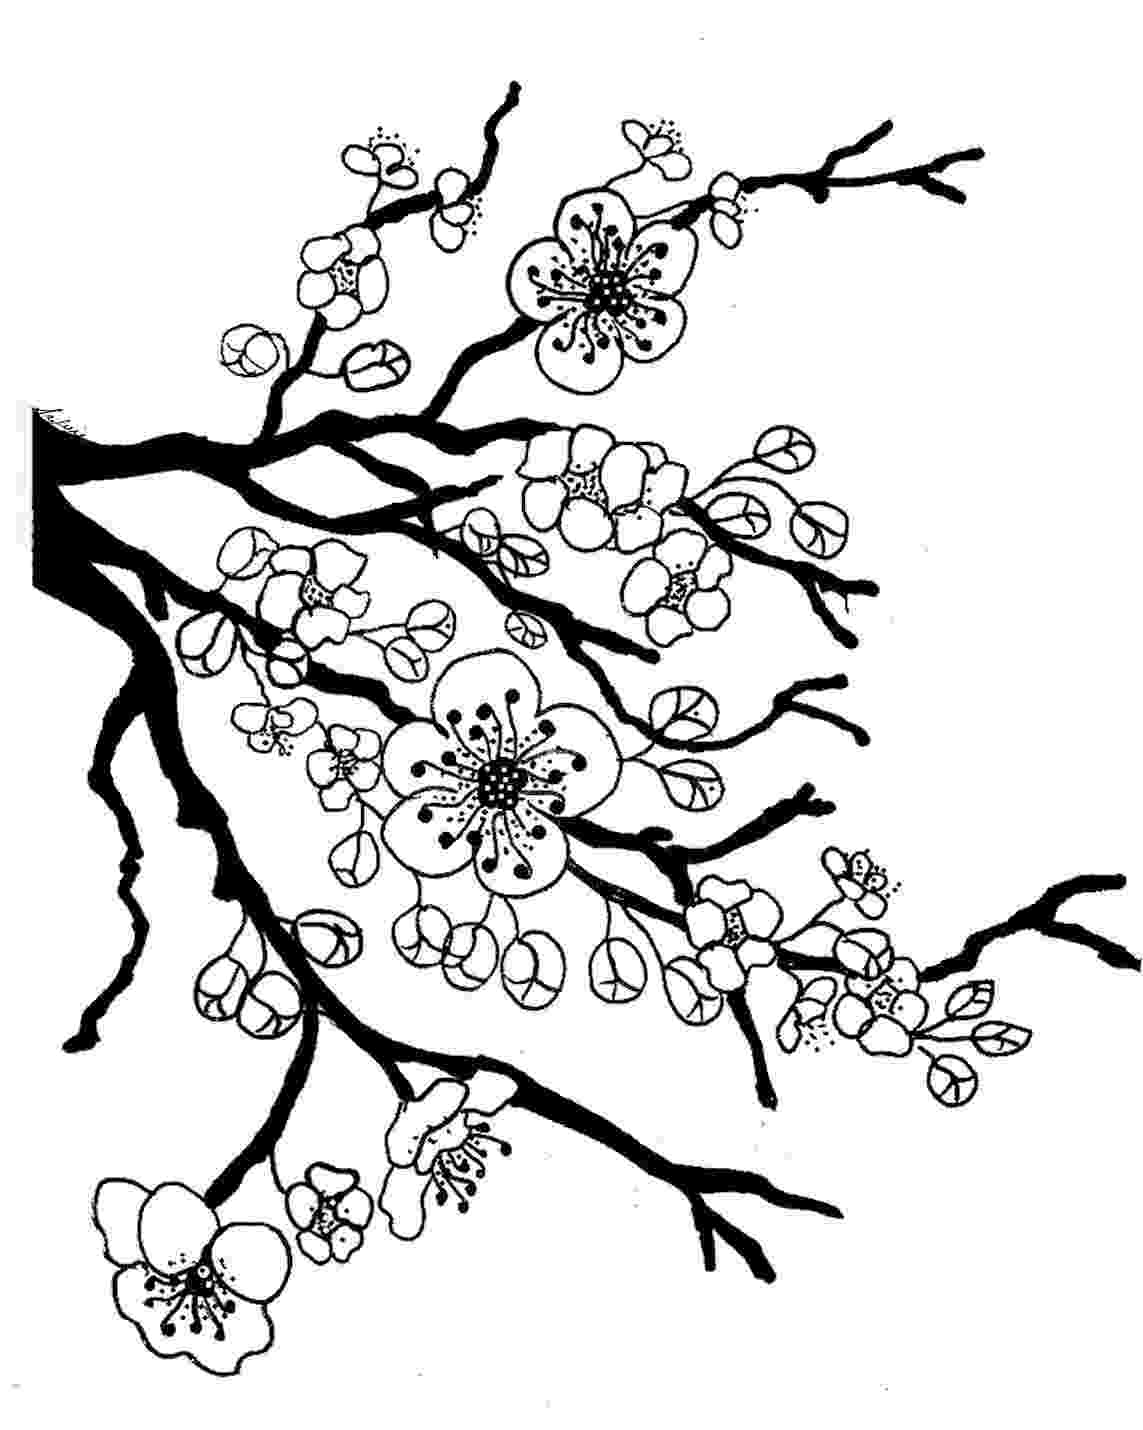 apple blossom coloring page s hopkins apple blossom coloring page coloring pages apple page coloring blossom 